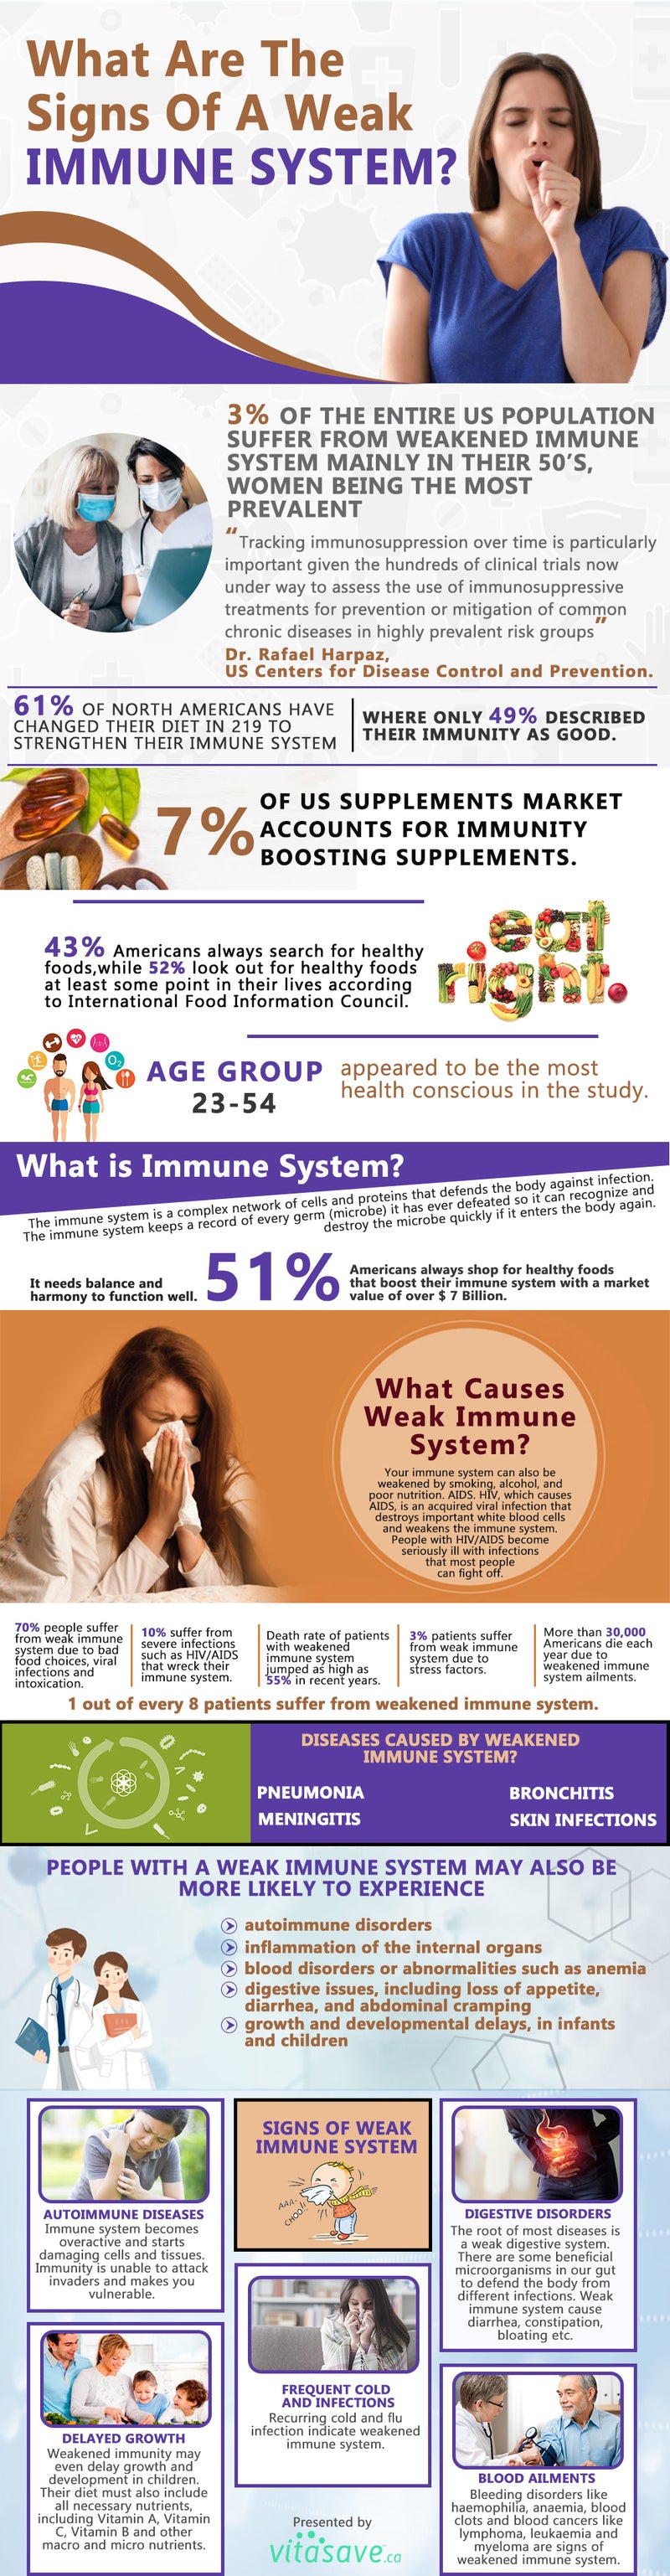 What Are the Signs of a Weak Immune System?